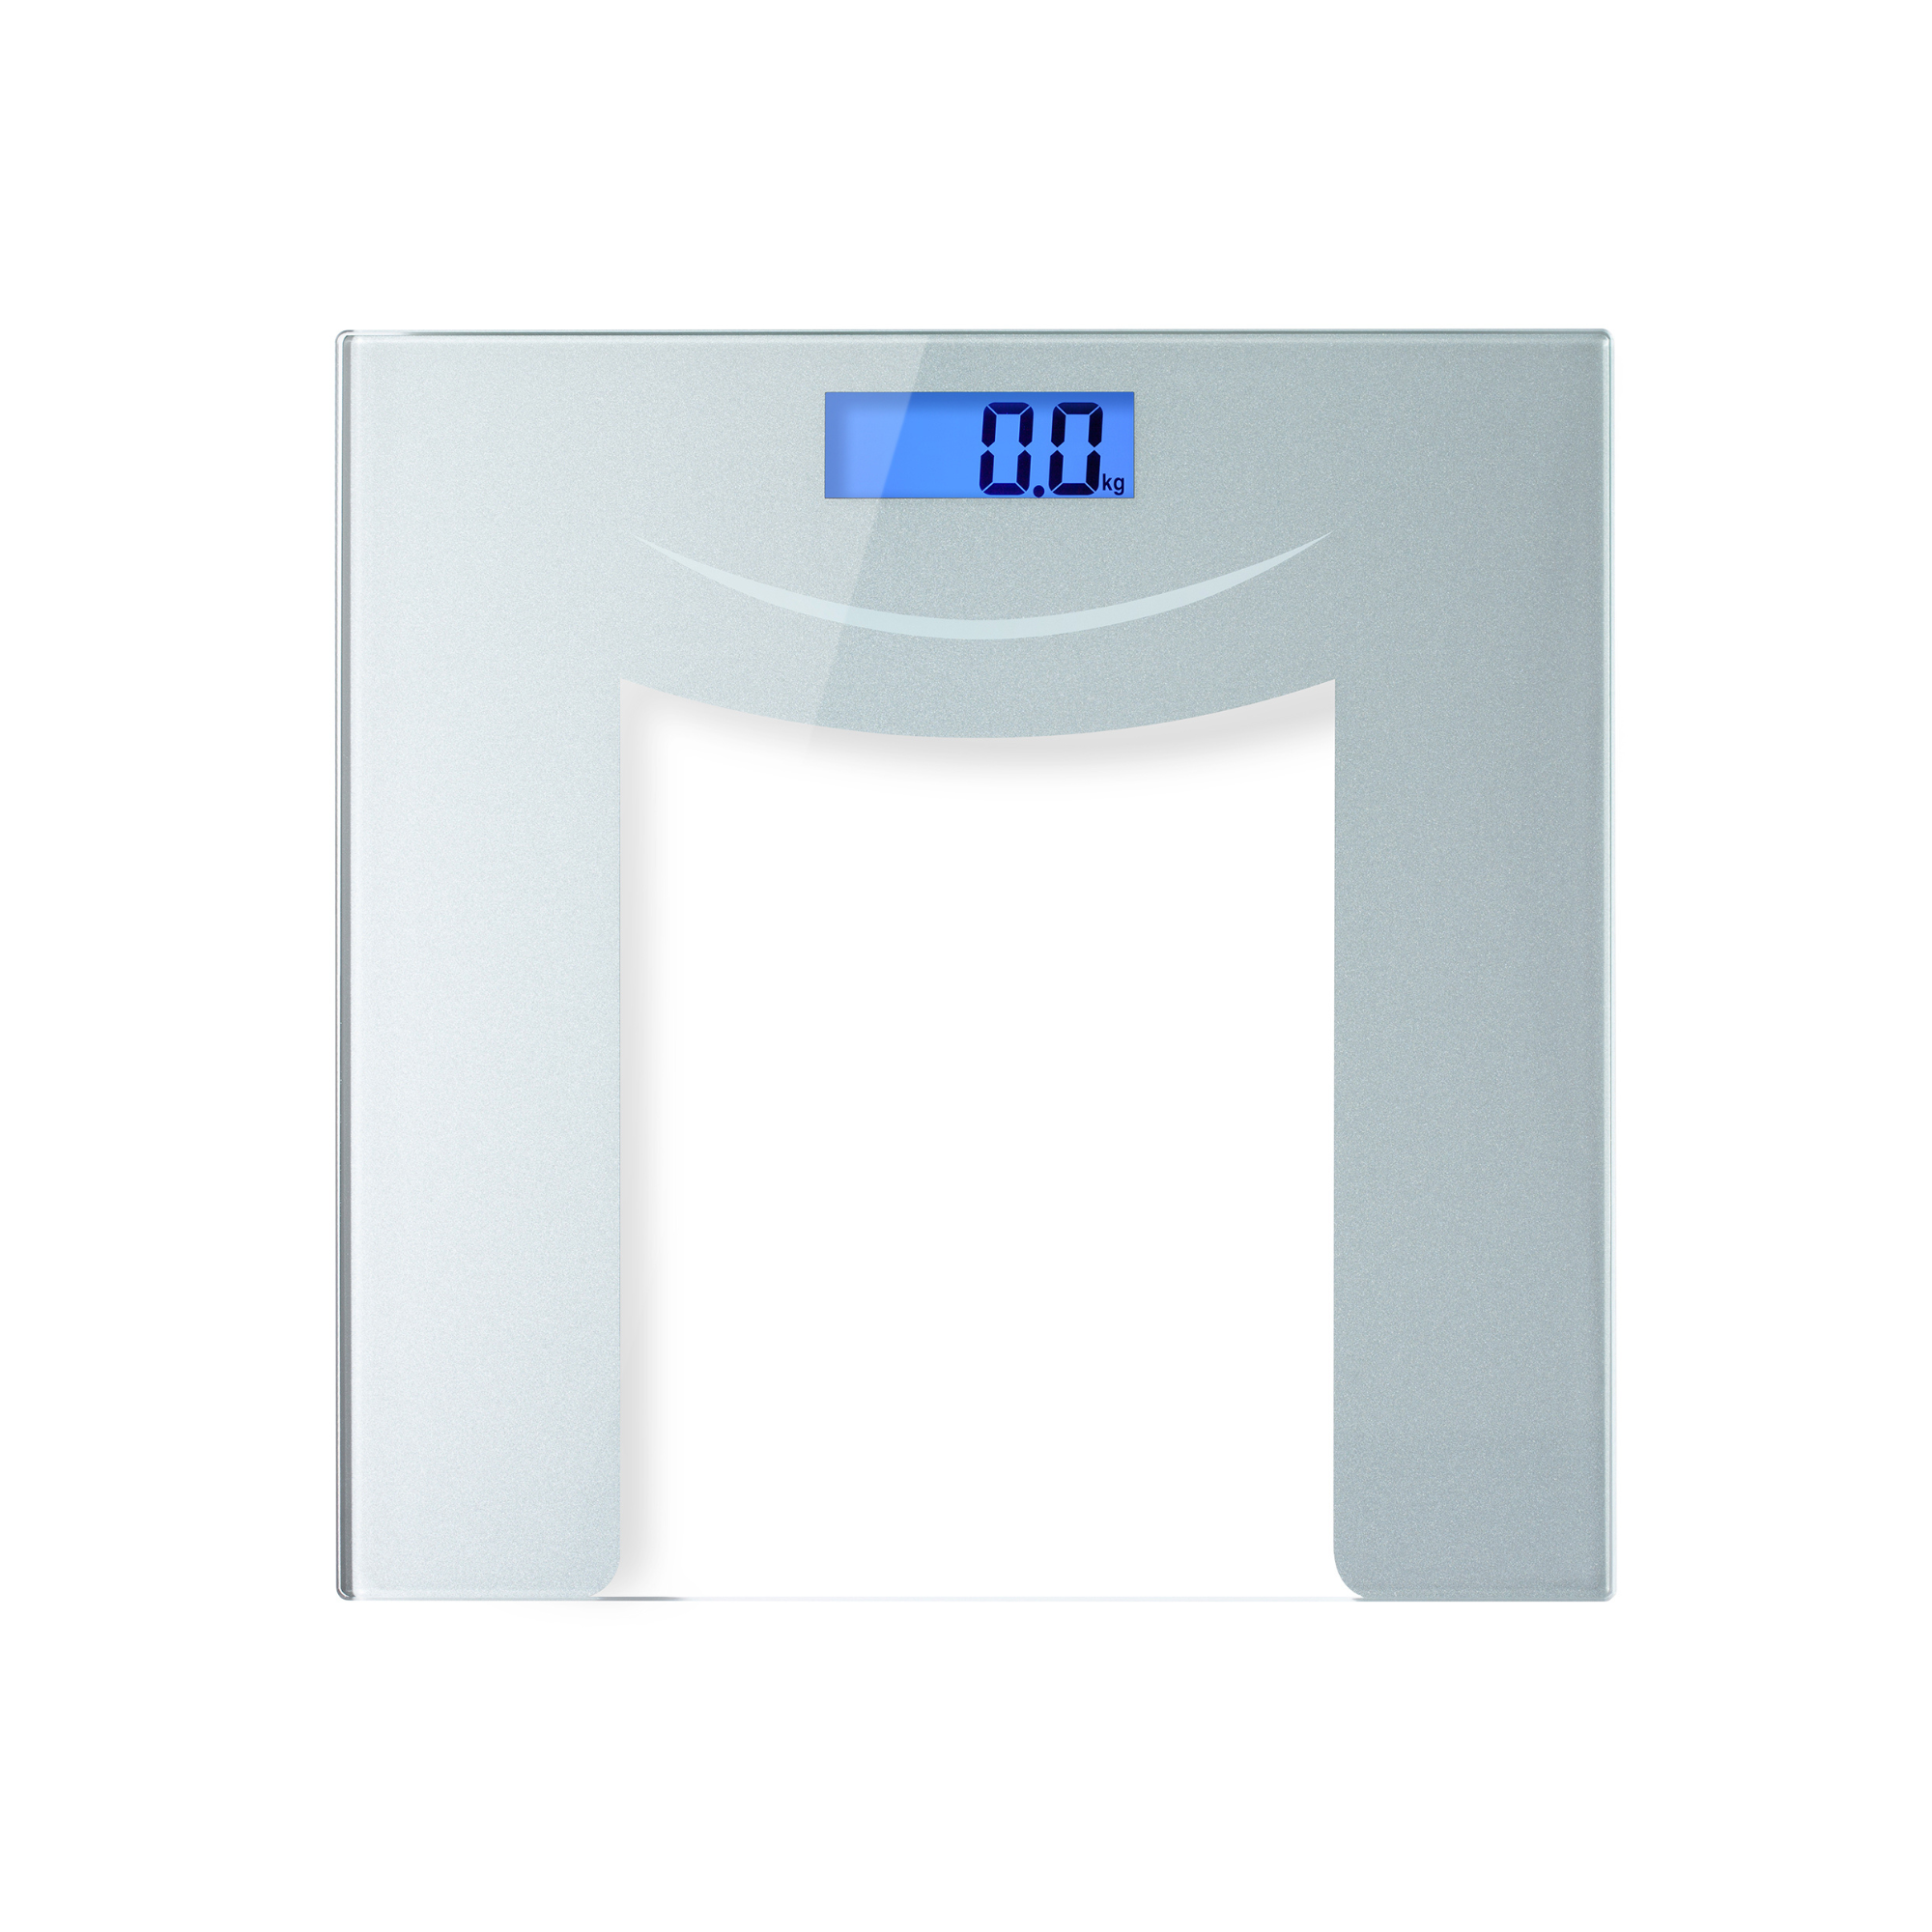 Prominence Home Digital Bathroom Scale for Body Weight, Auto Step-On Design, Ultra Thin - Clear - Glass